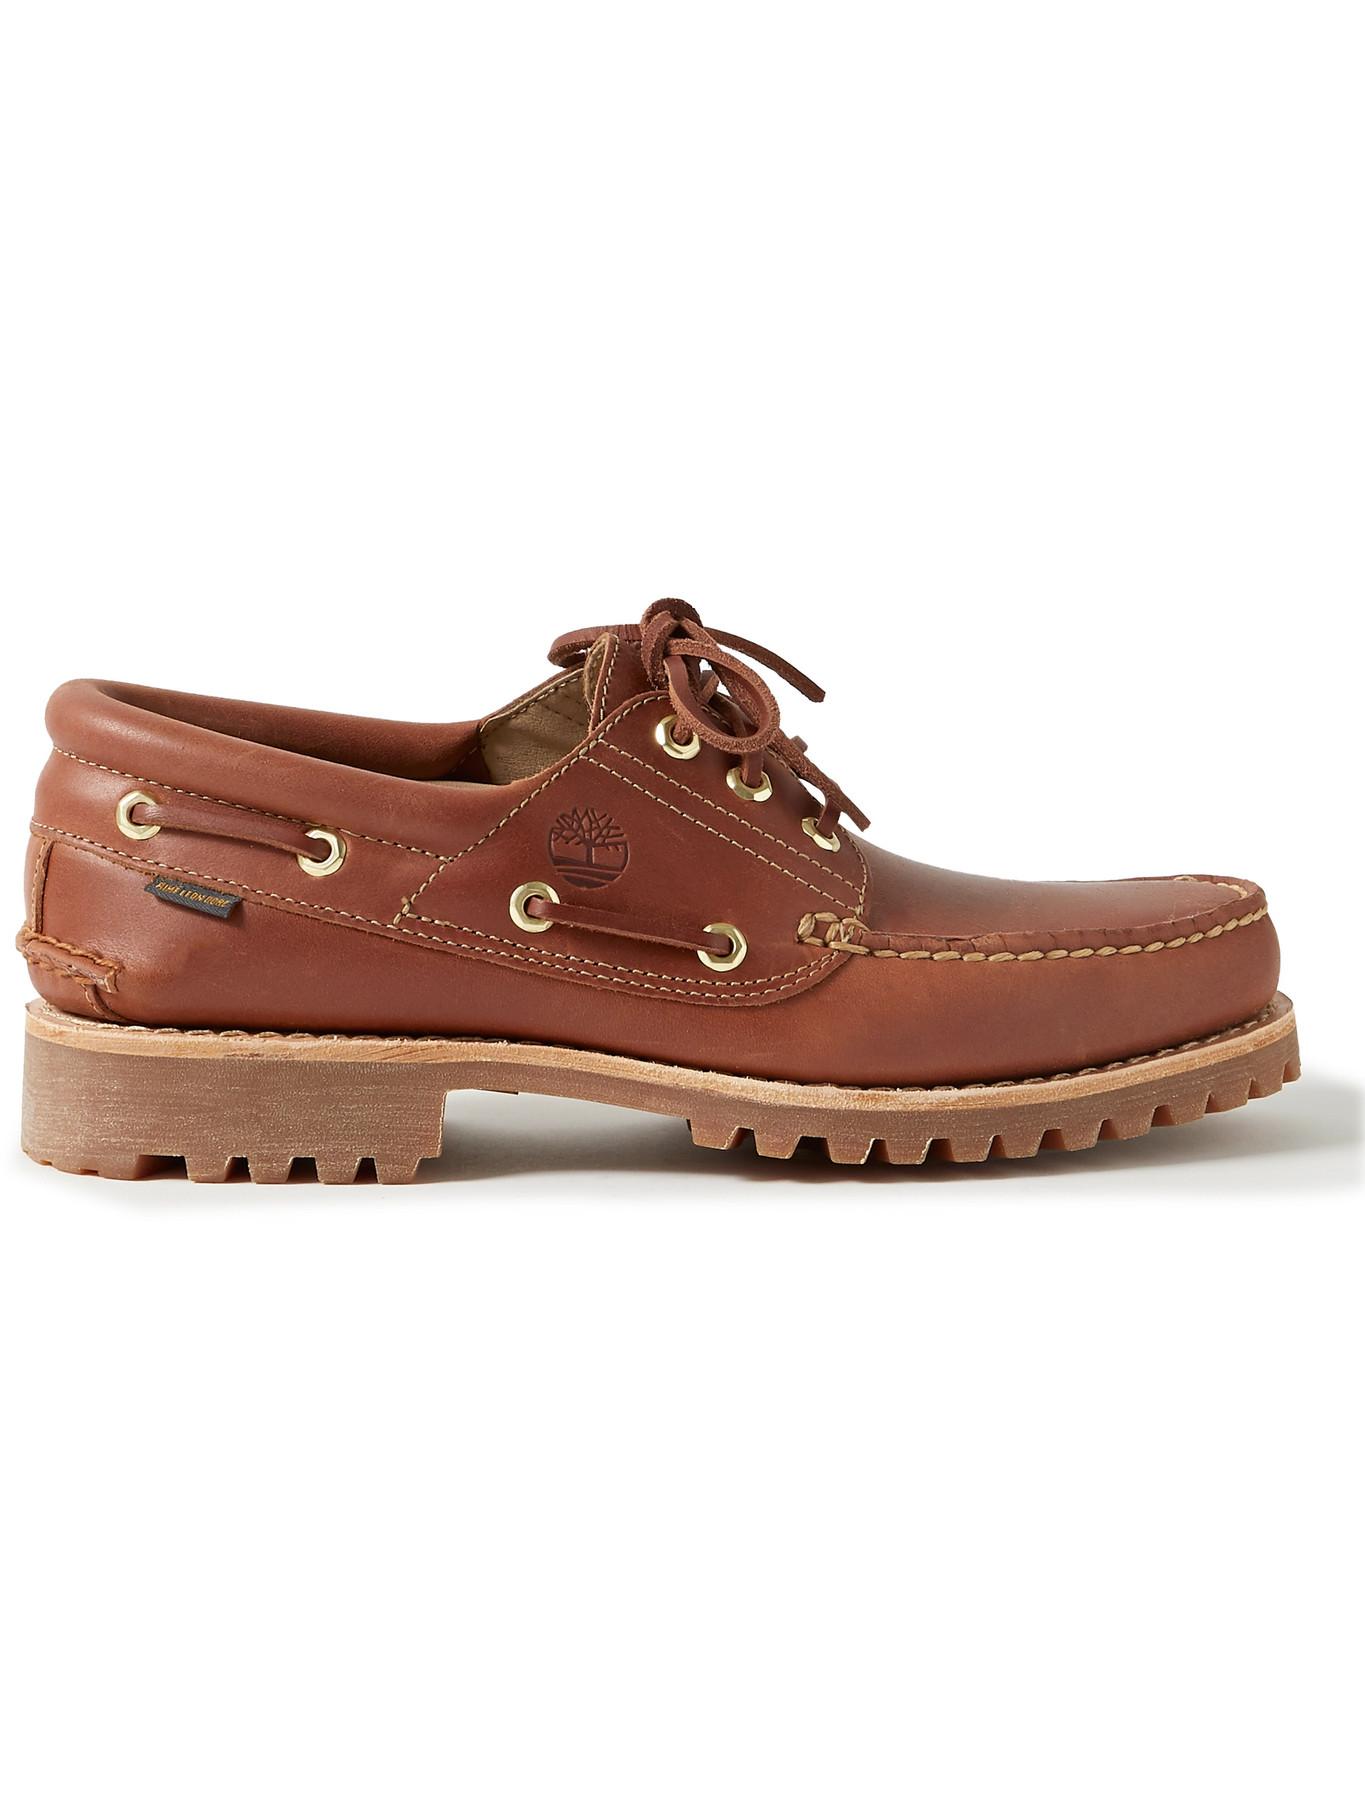 Timberland Aimé Leon Dore 3-eye Lug Leather Boat Shoes in Brown